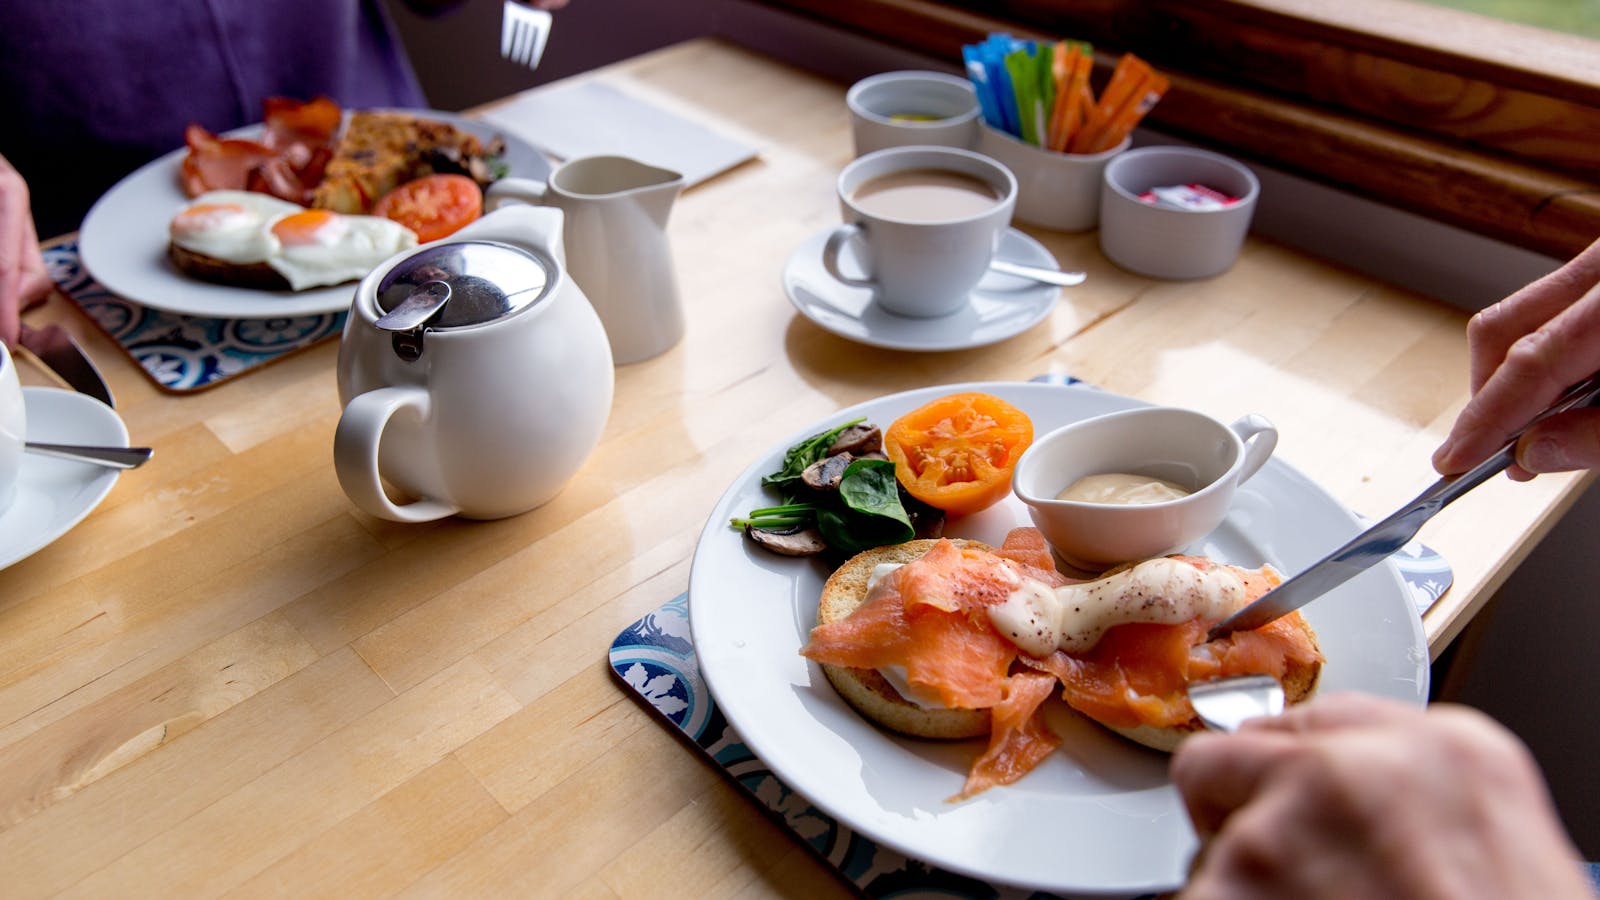 Breakfast is cooked to order at a time to suit. Vegetarians, vegans and allergies catered for.